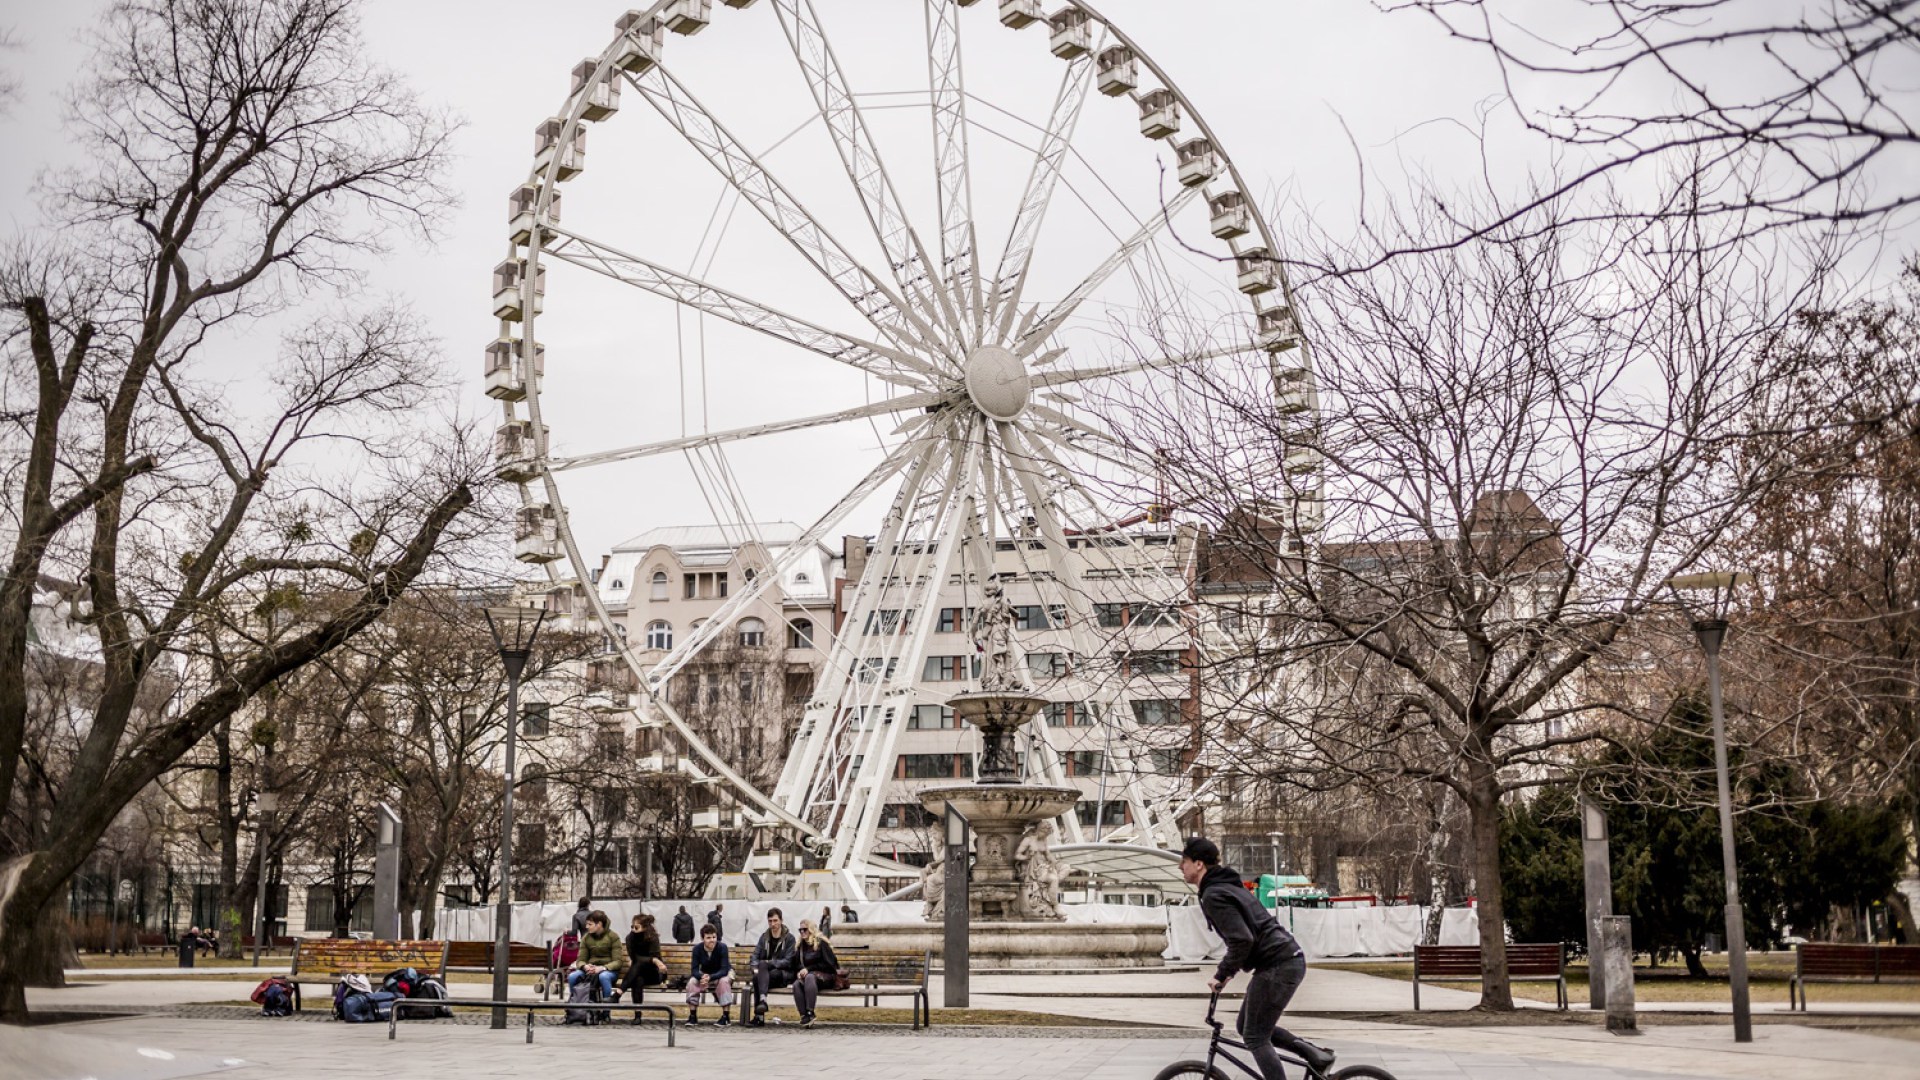 A huge Ferris wheel is back in central Budapest's Erzsébet Square ...